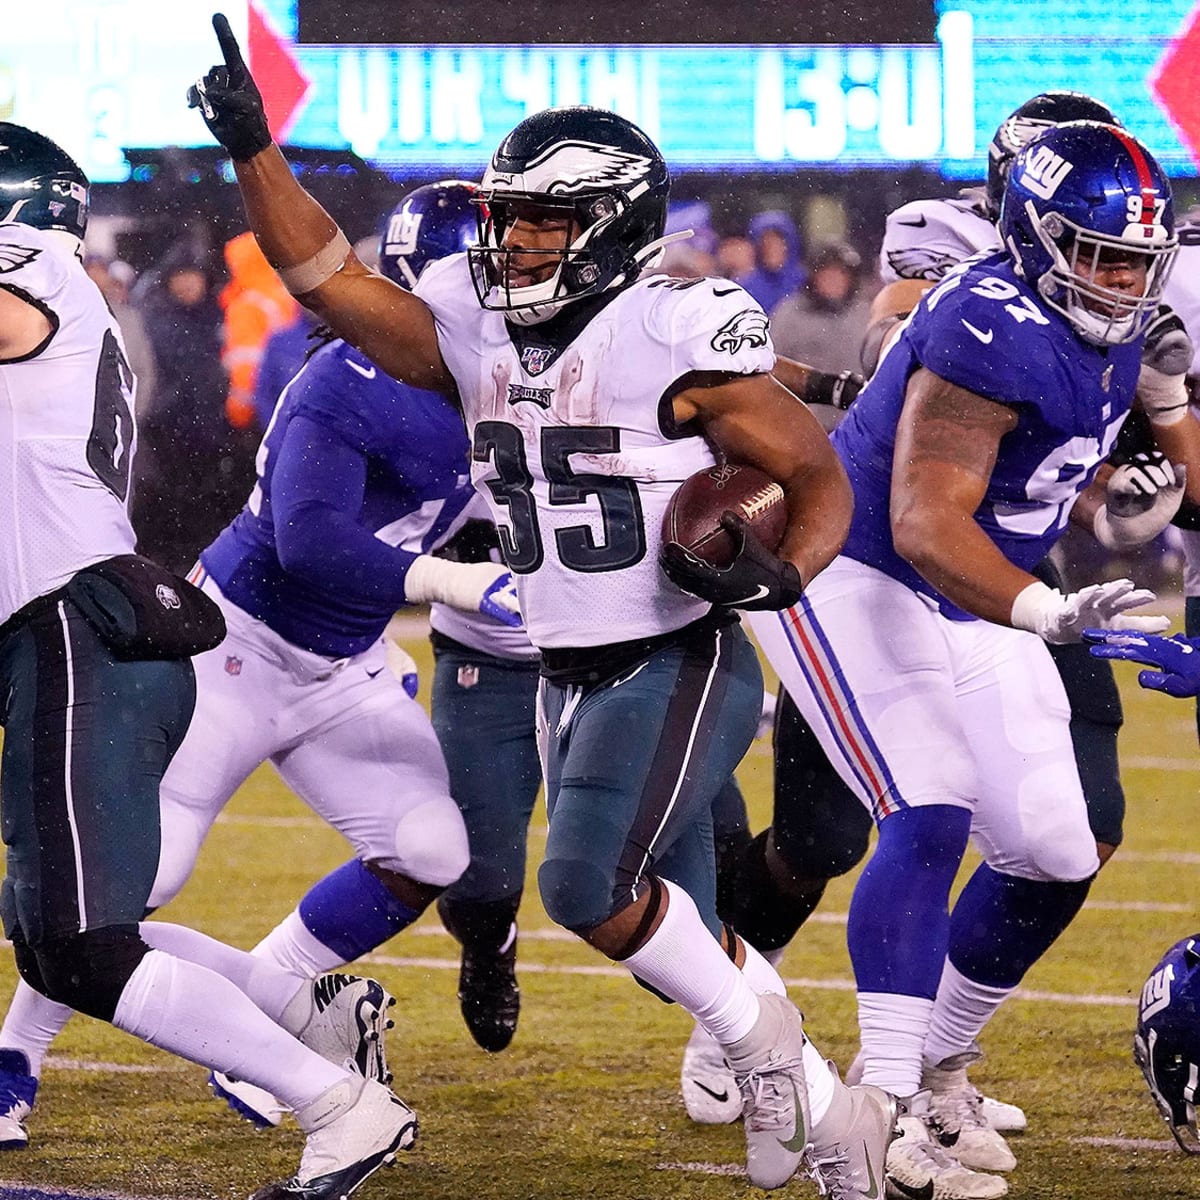 NFC East-leading Eagles host AFC South-leading Titans